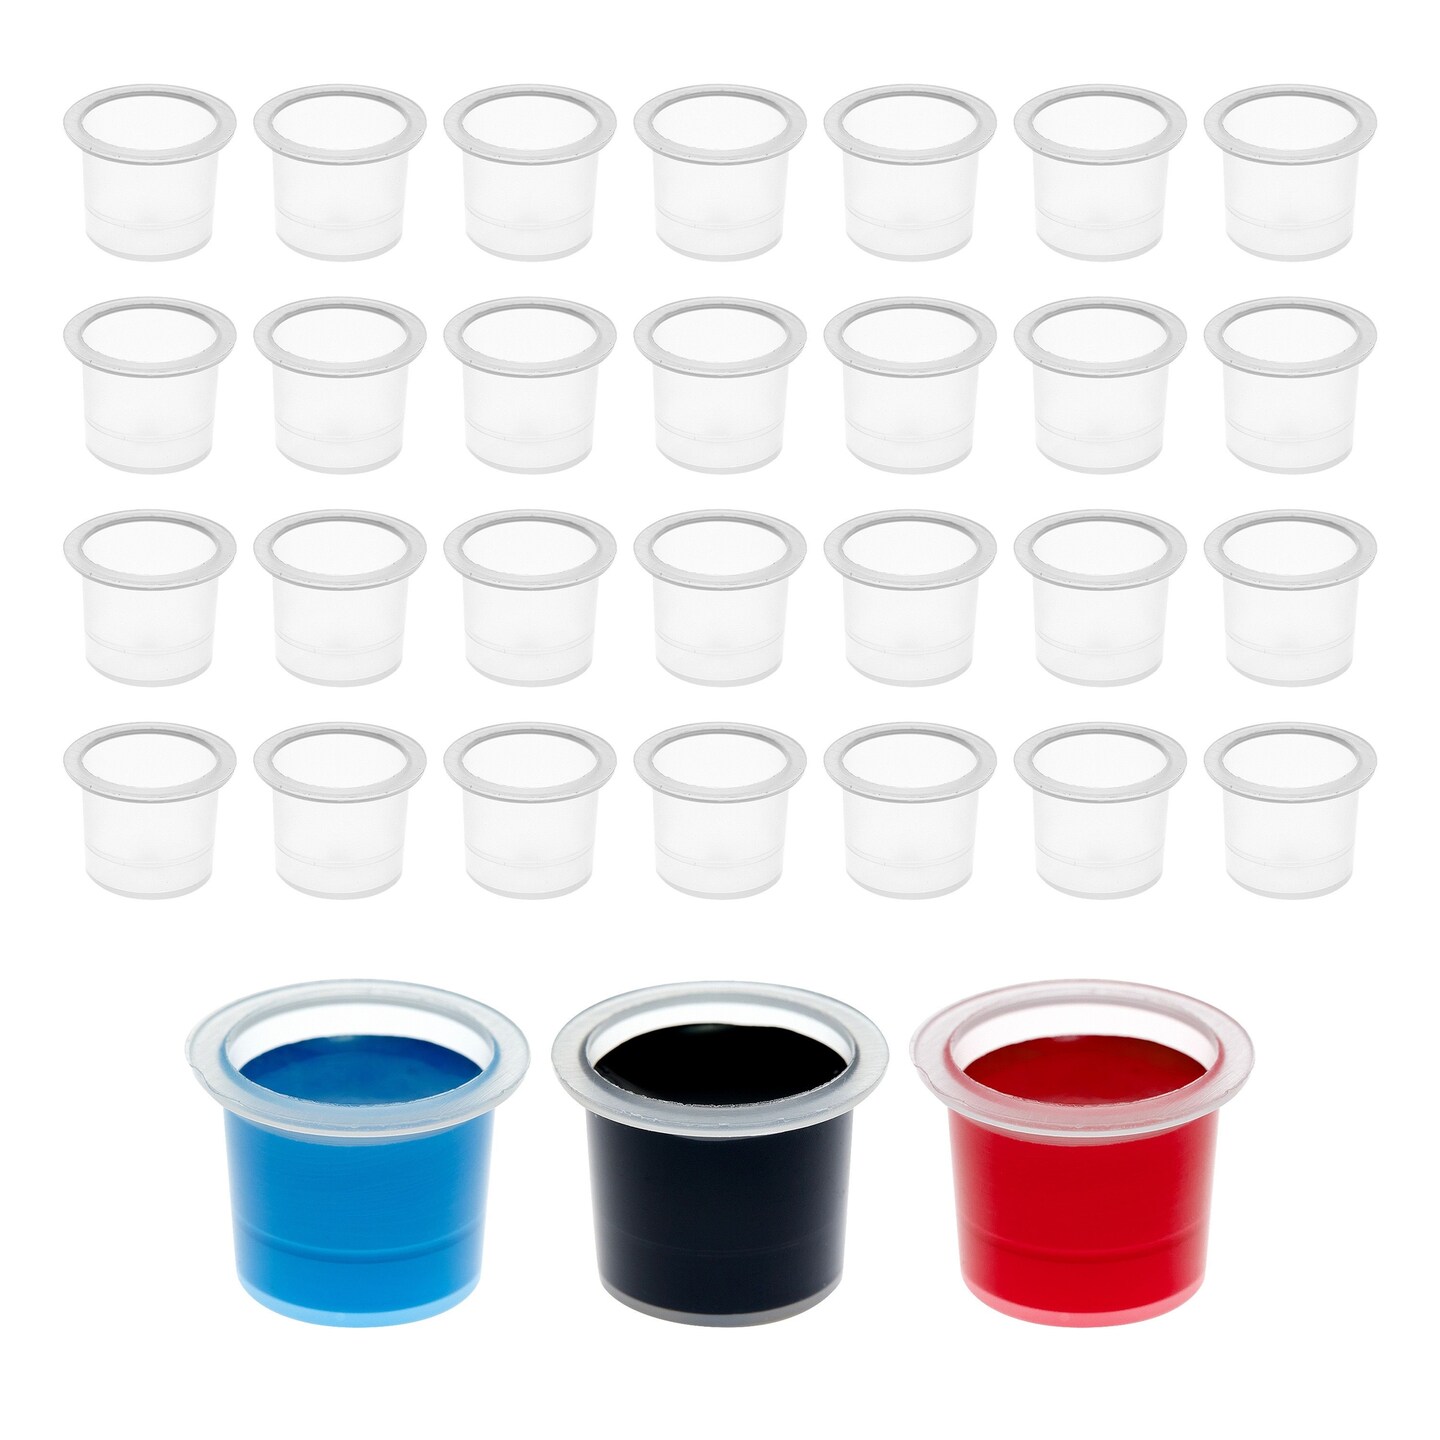 Tattoo Ink Cups, Anghie 500PCS Dispoable Large Tattoo Ink Cups Pigment Cups  #15 Lagre Tattoo Ink Caps for Tattoo Ink, Tattoo Machines, Tattoo Supplies,  Tattoo Kits : Amazon.in: Beauty